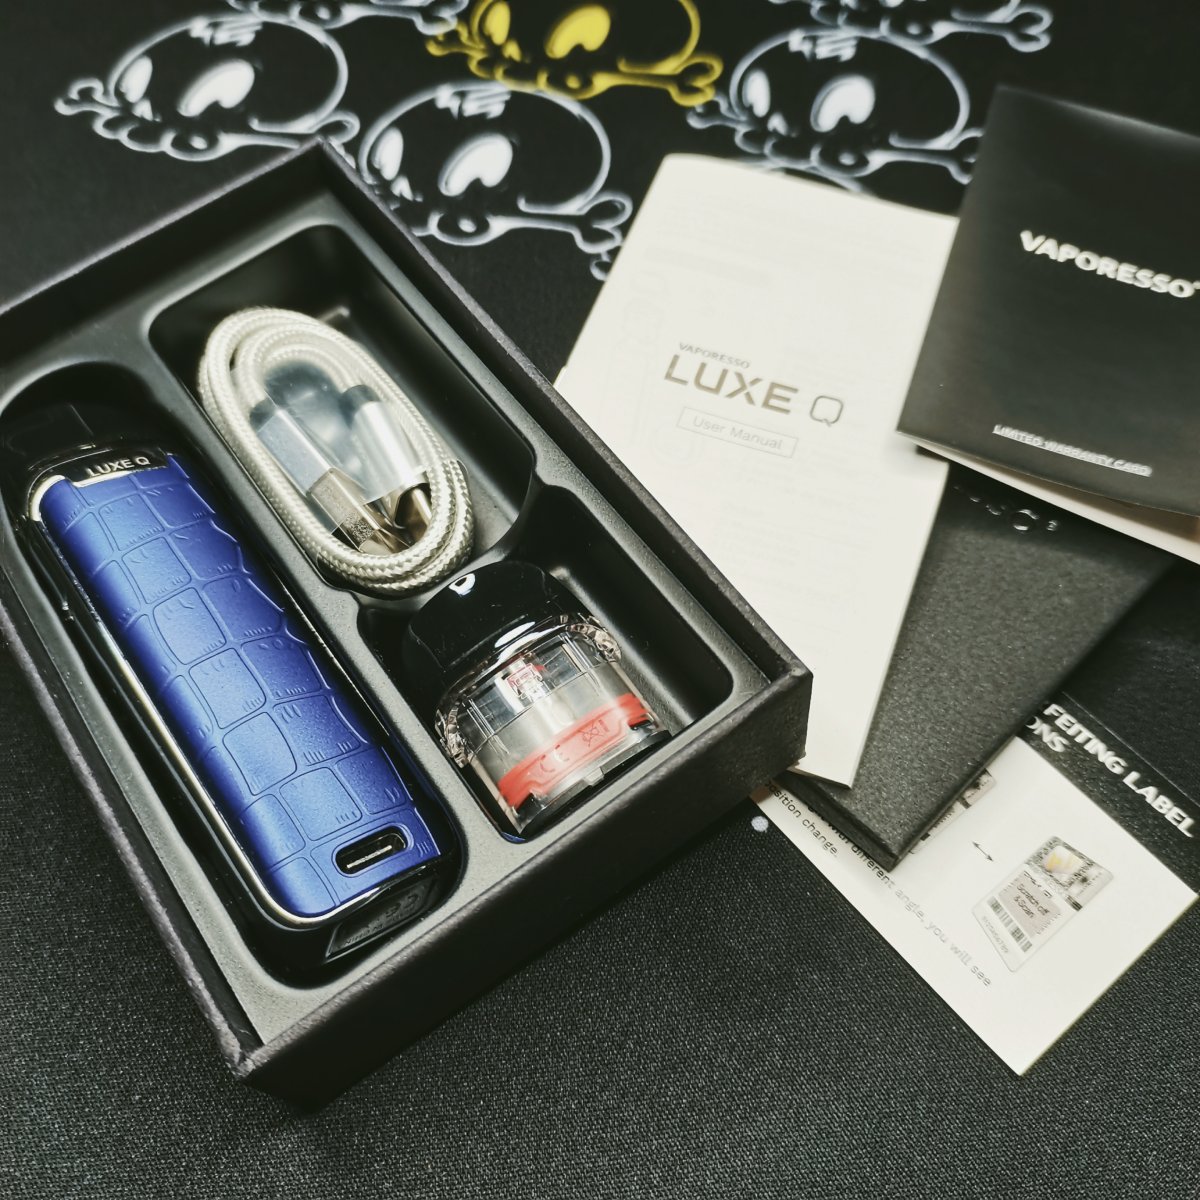 Vaporesso LUXE Q review 